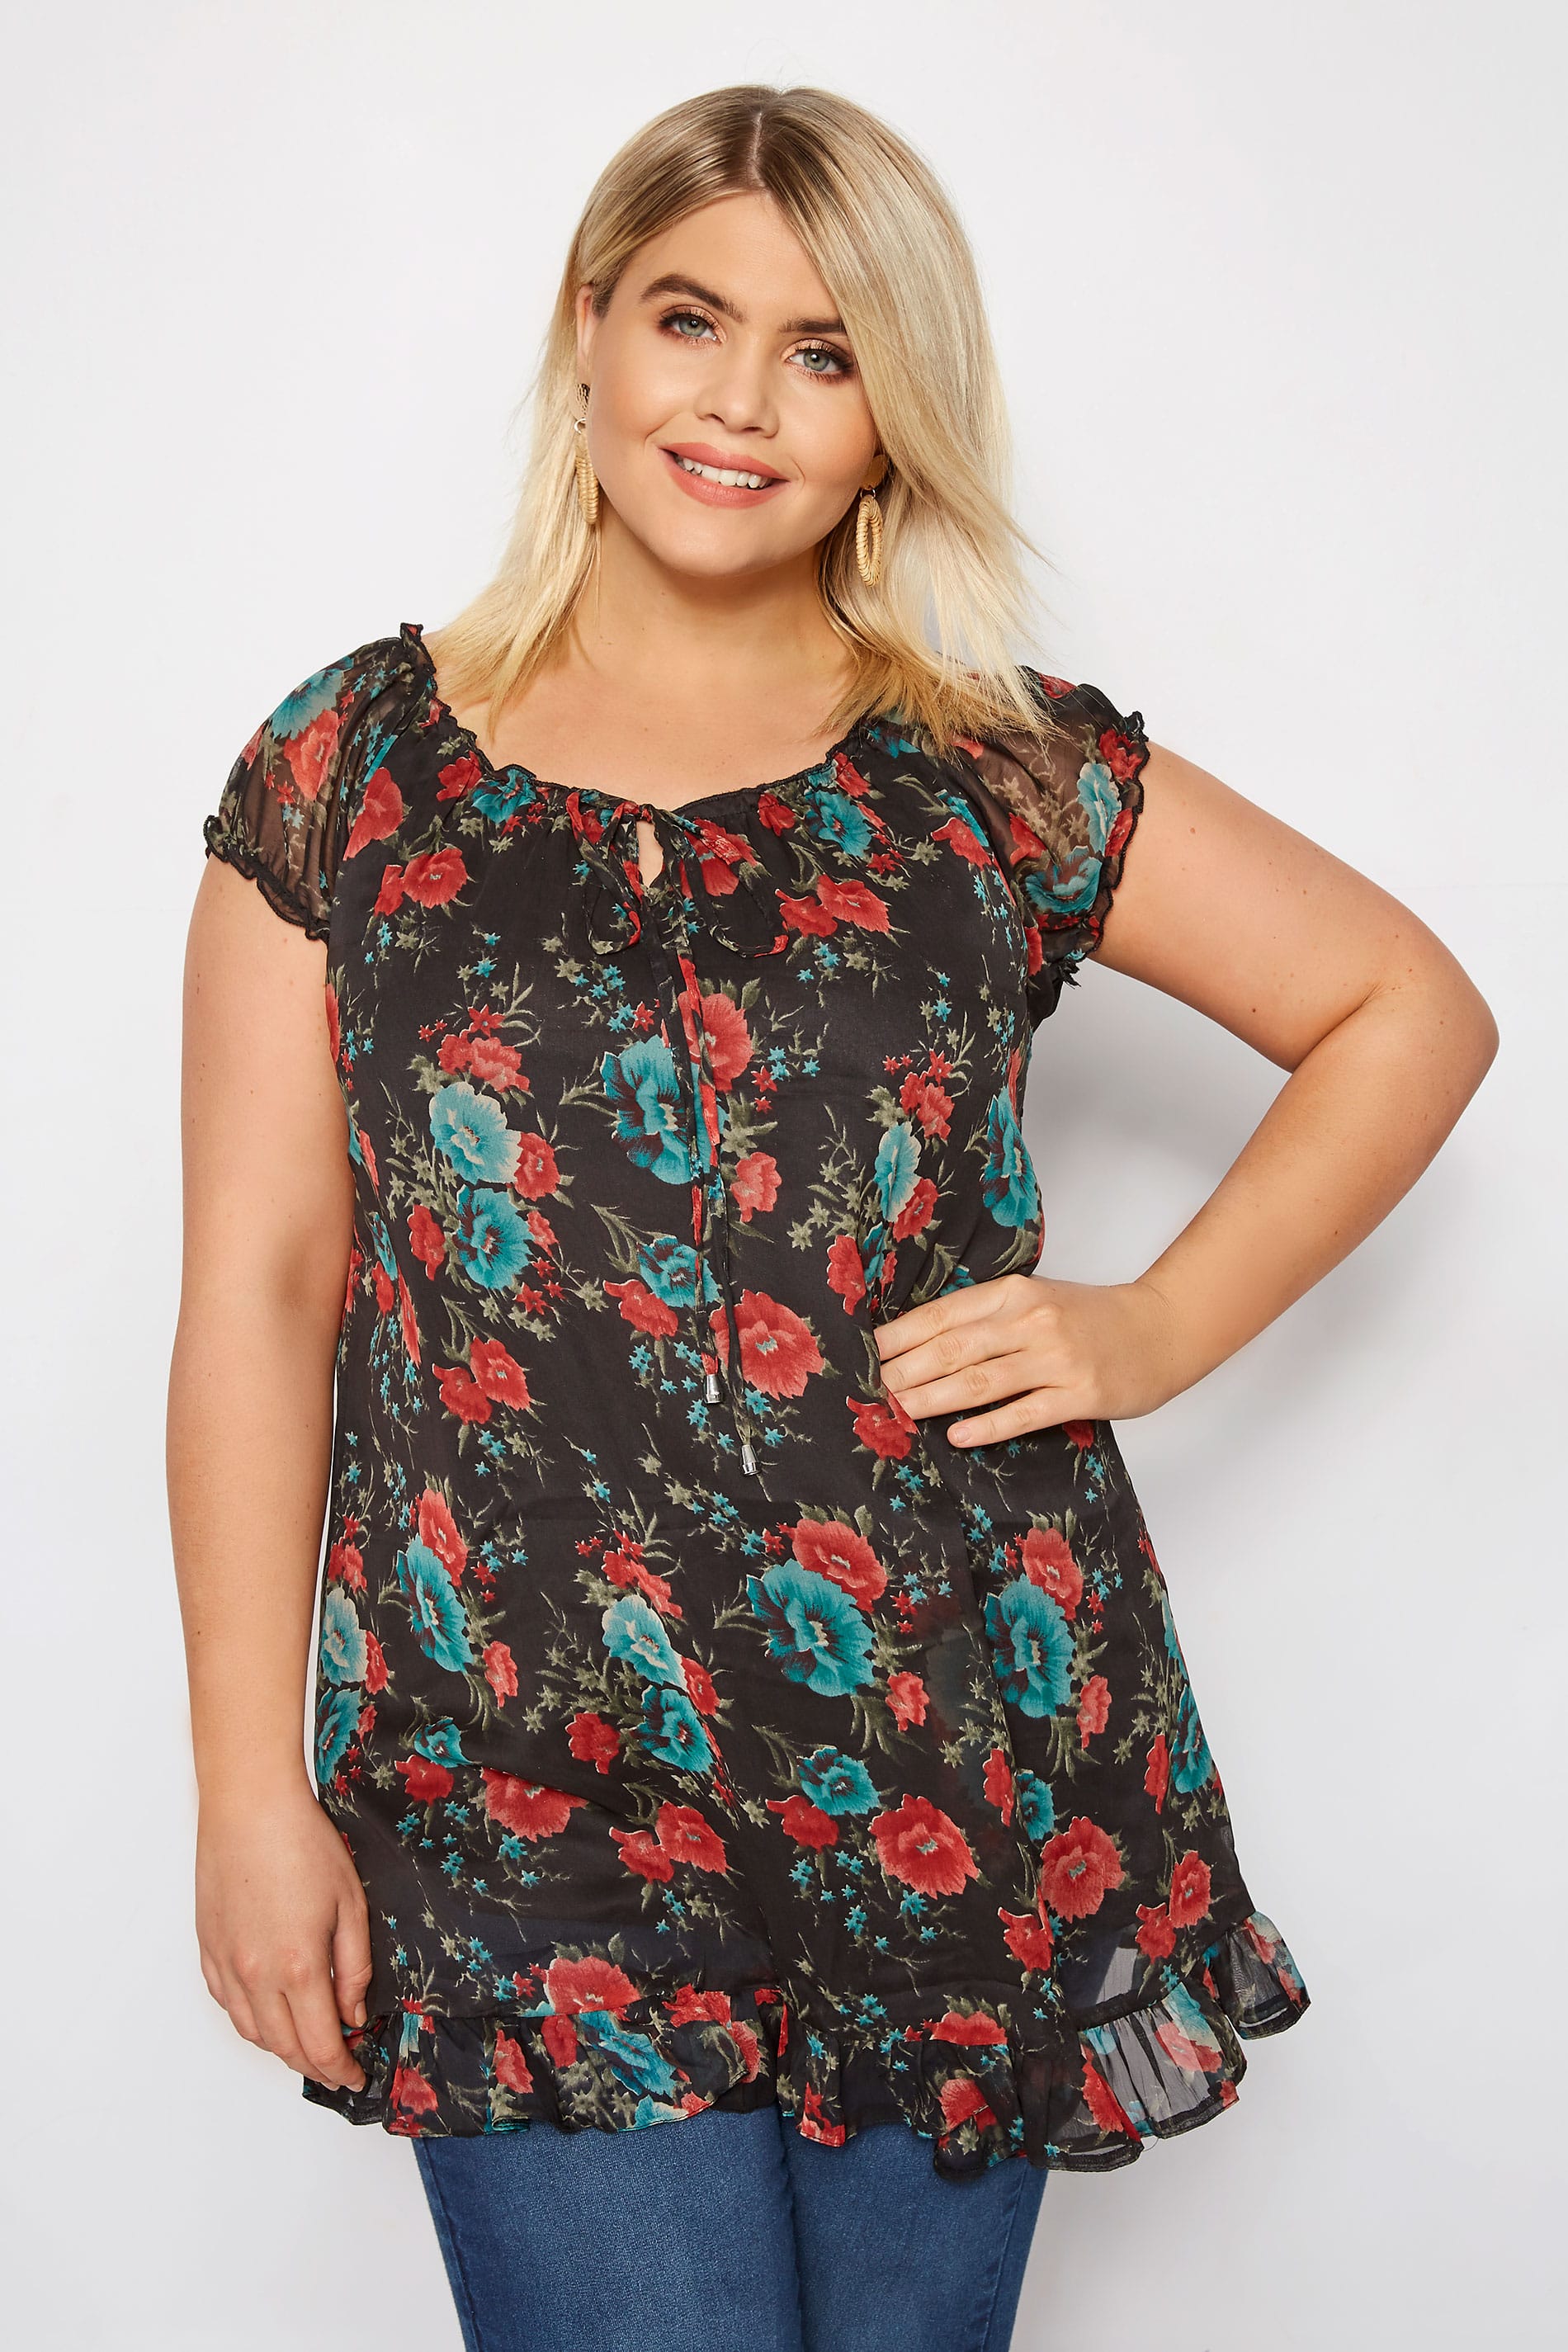 Black Floral Short Sleeve Printed Gypsy Top Plus size 16 